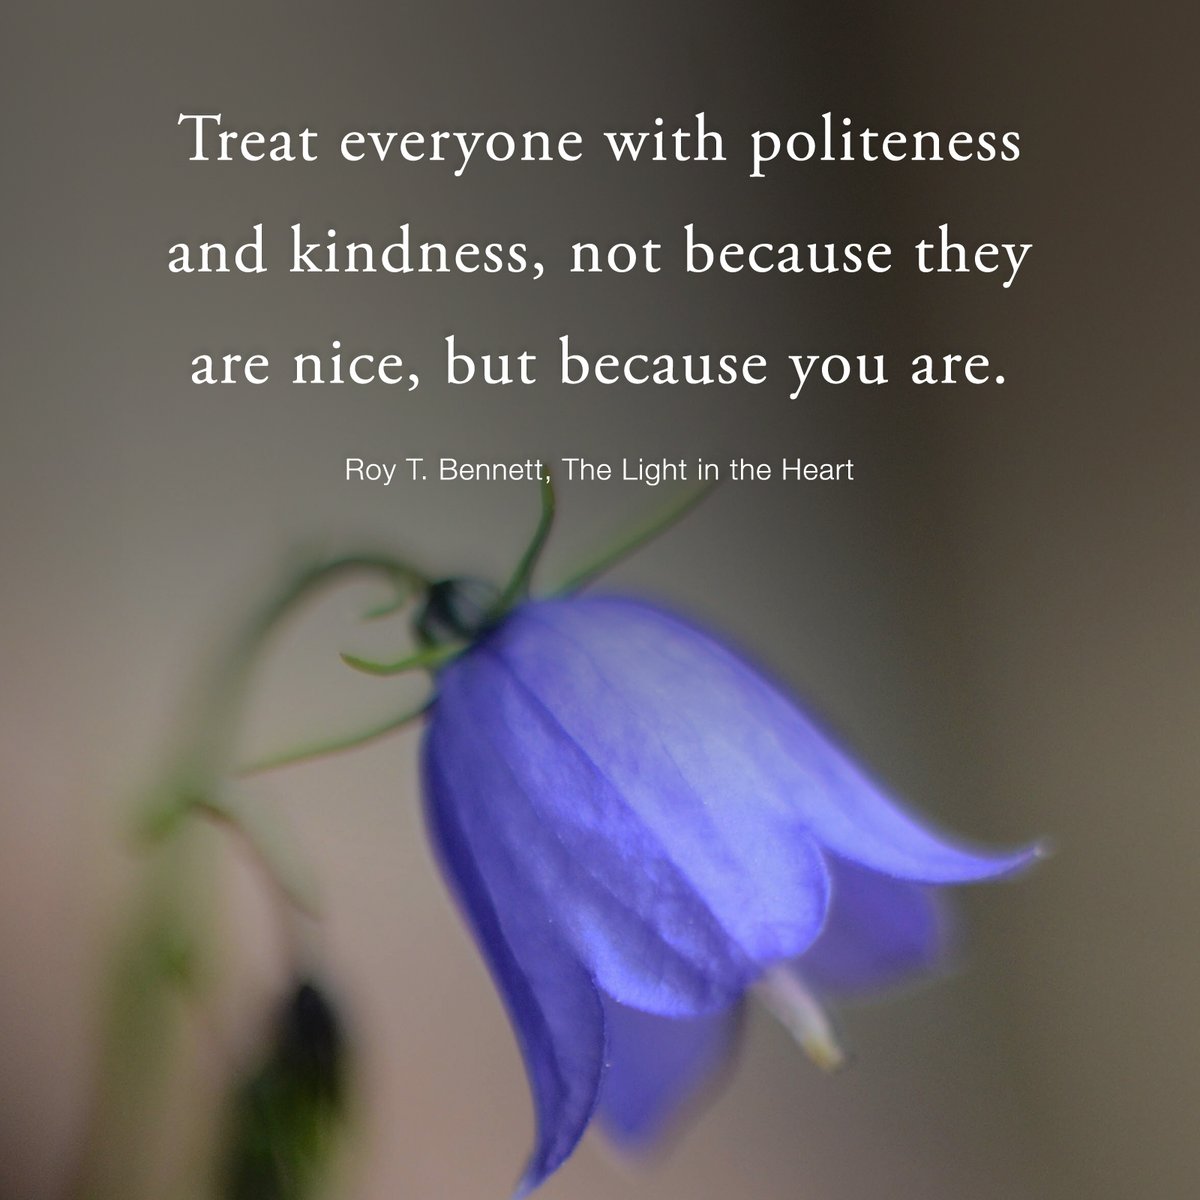 Treat everyone with politeness and kindness, not because they are nice, but because you are. Roy T. Bennett, The Light in the Heart #motivation #Inspiration #quote #quotes #RoyTBennett